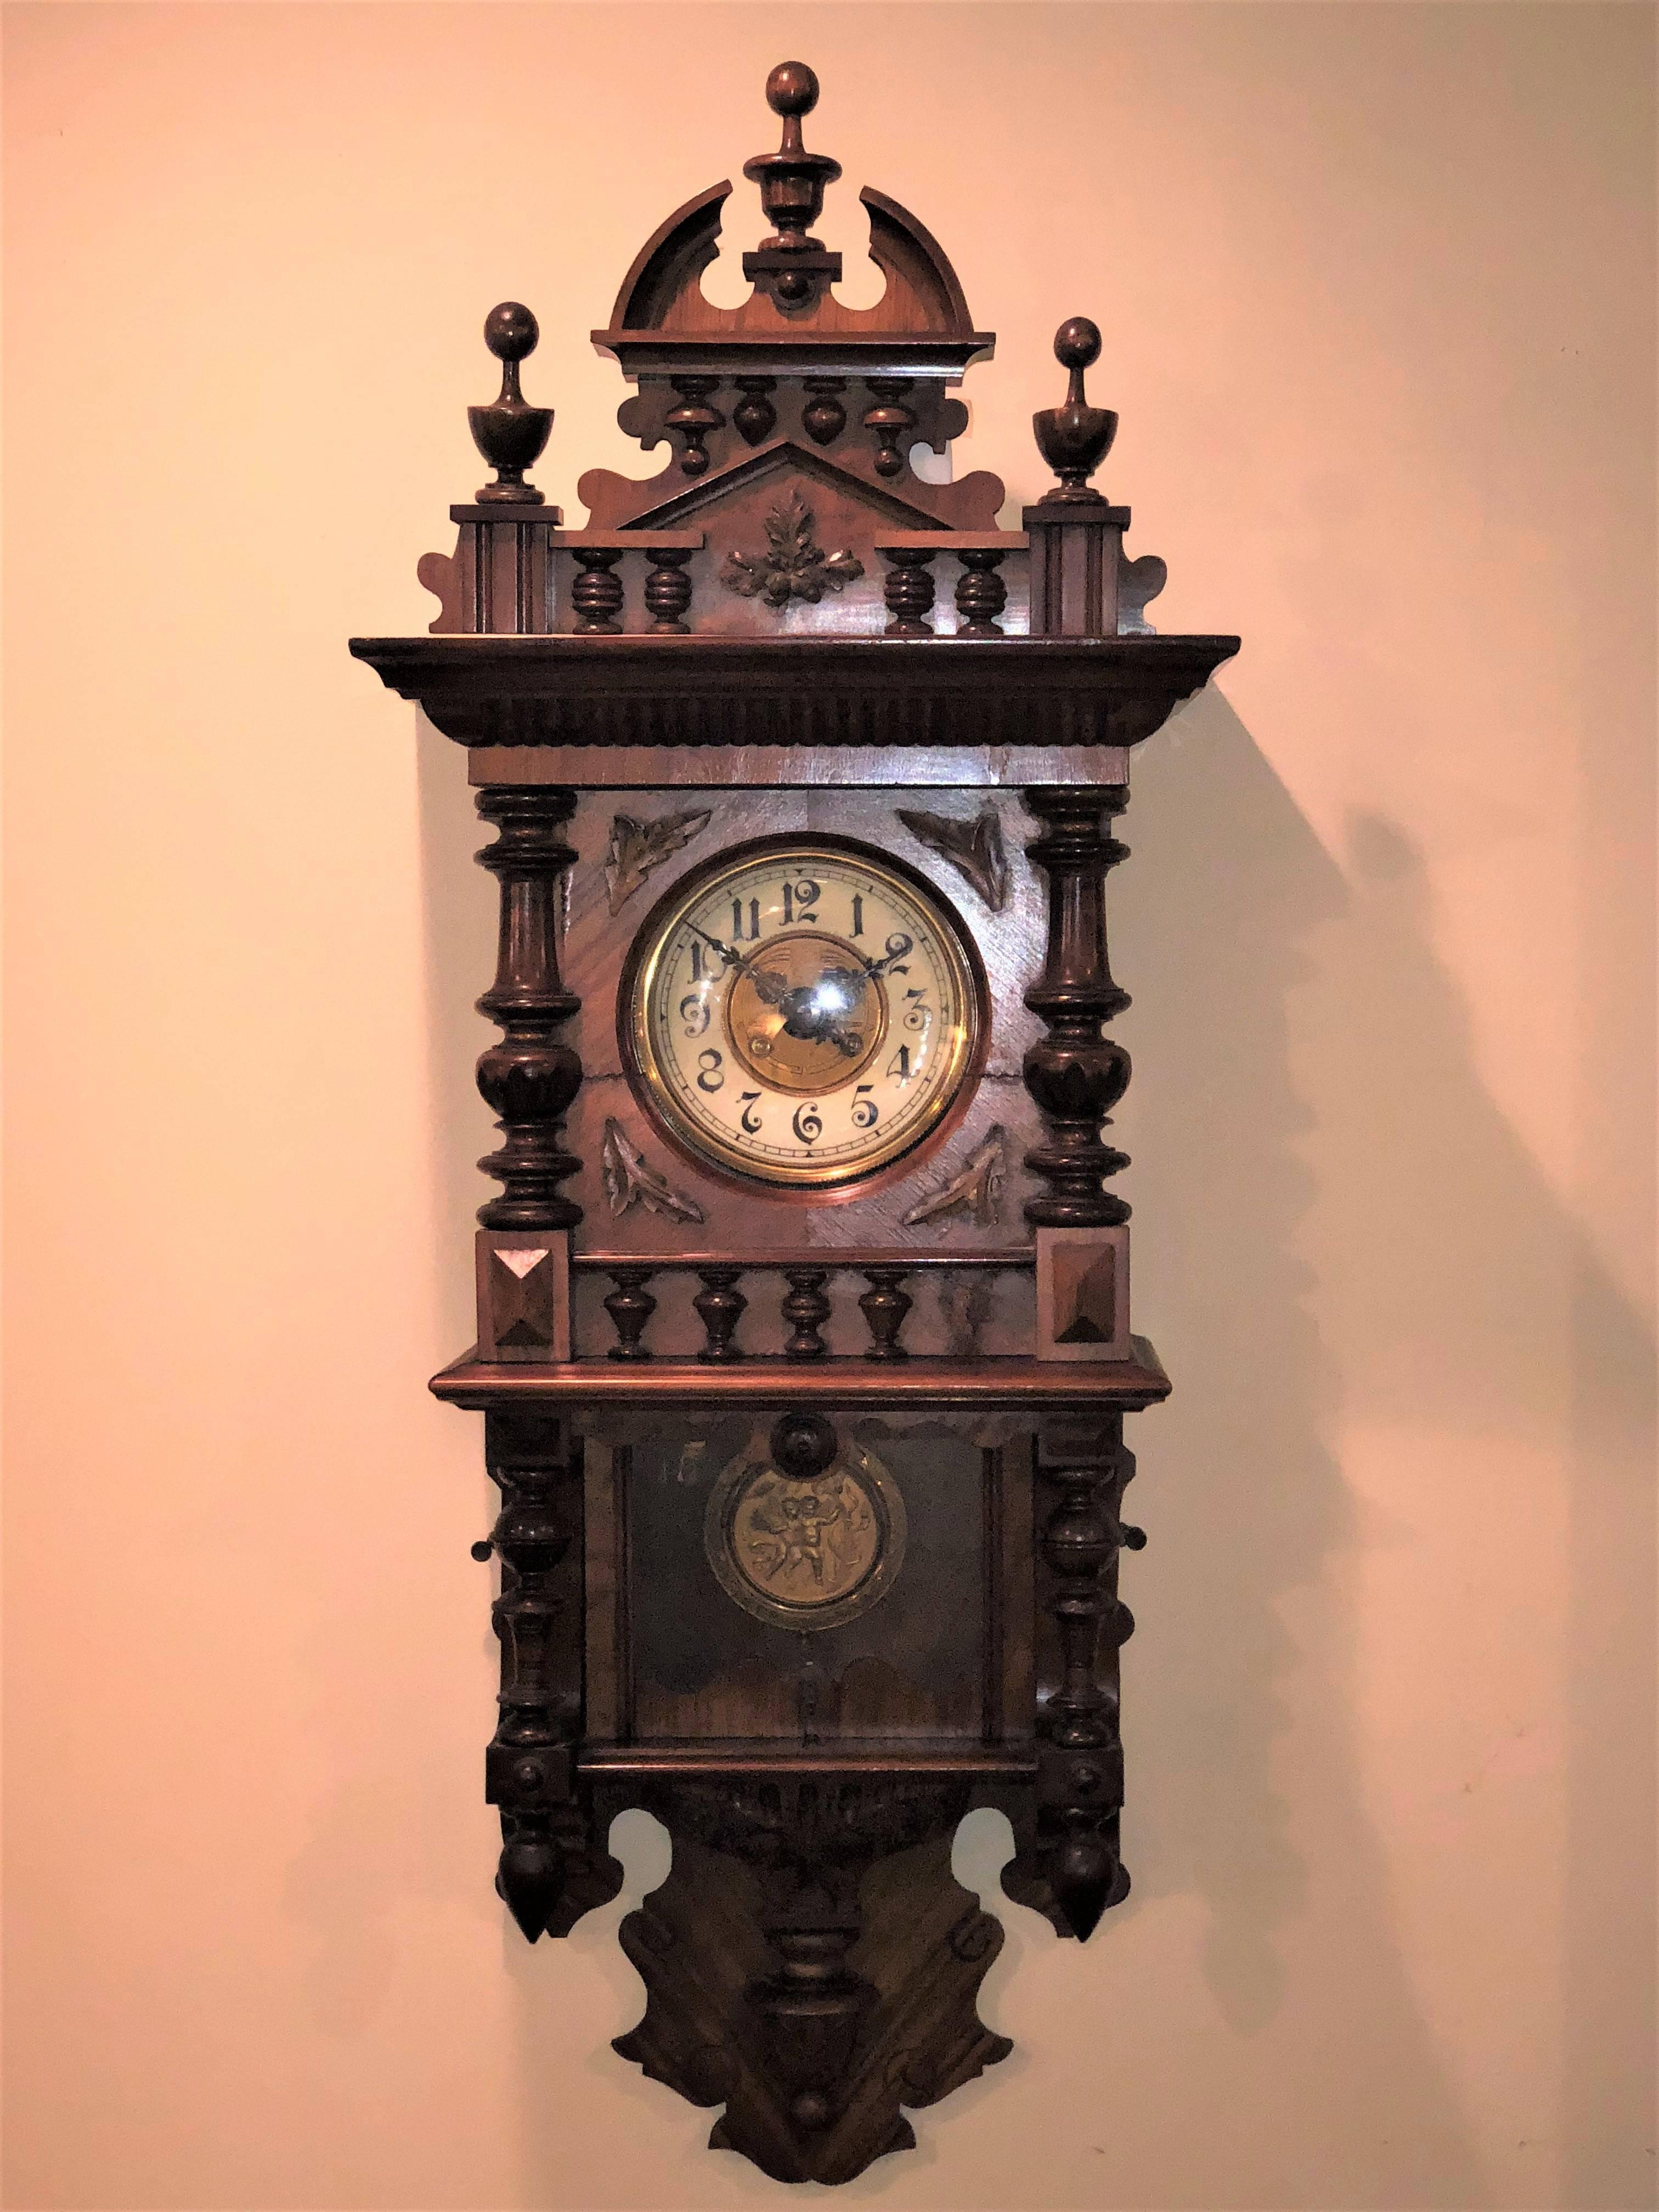 Fine 19th-early 20th century Gustav Becker style Victorian wall clock with key and pendulum. This finely carved and intricately worked case depicts the Victorian golden age at its highest level. The works signed and numbered by Adler. The interior